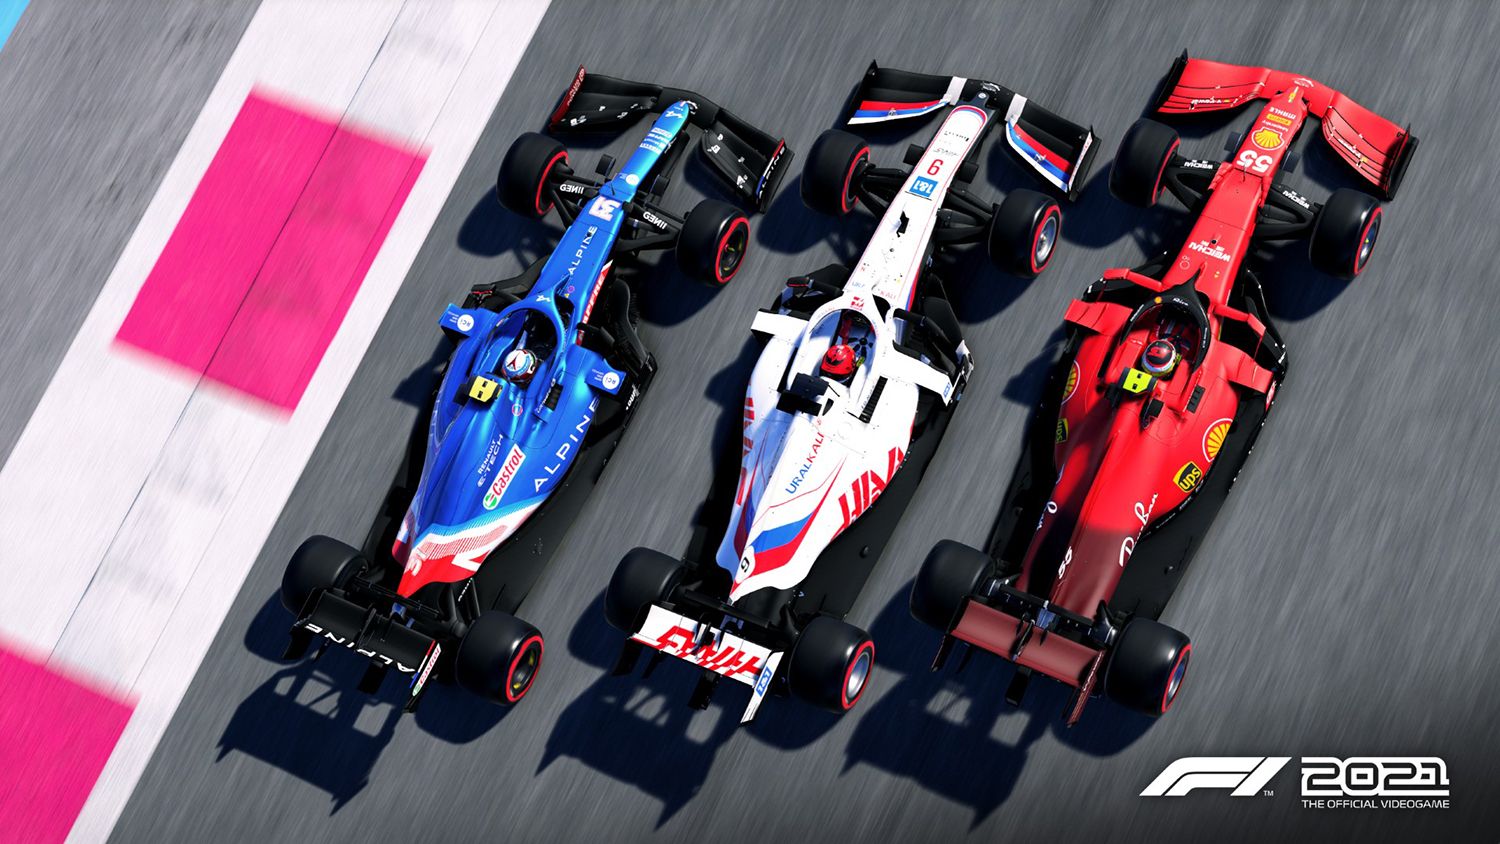 July for Launches 16 F1 2021 Game Trailer Watch Features That